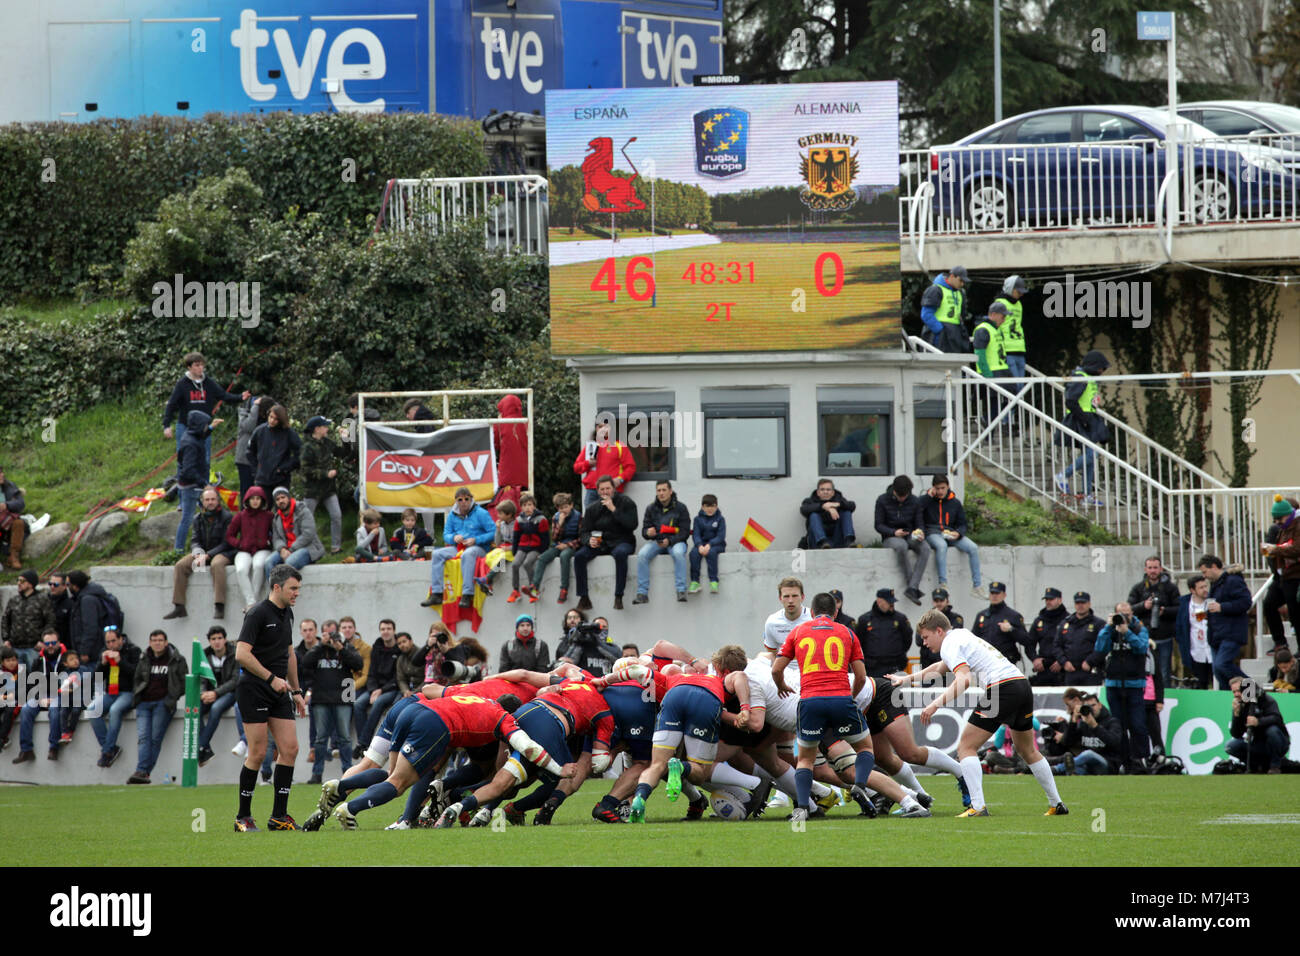 during the match of rugby between Spain vs Germany in the Central of Complutense Madrid on Sunday 11 March 2018. Spain won (84-10) Germany. Credit: Gtres Información más Comuniación on line, S.L./Alamy Live News Stock Photo